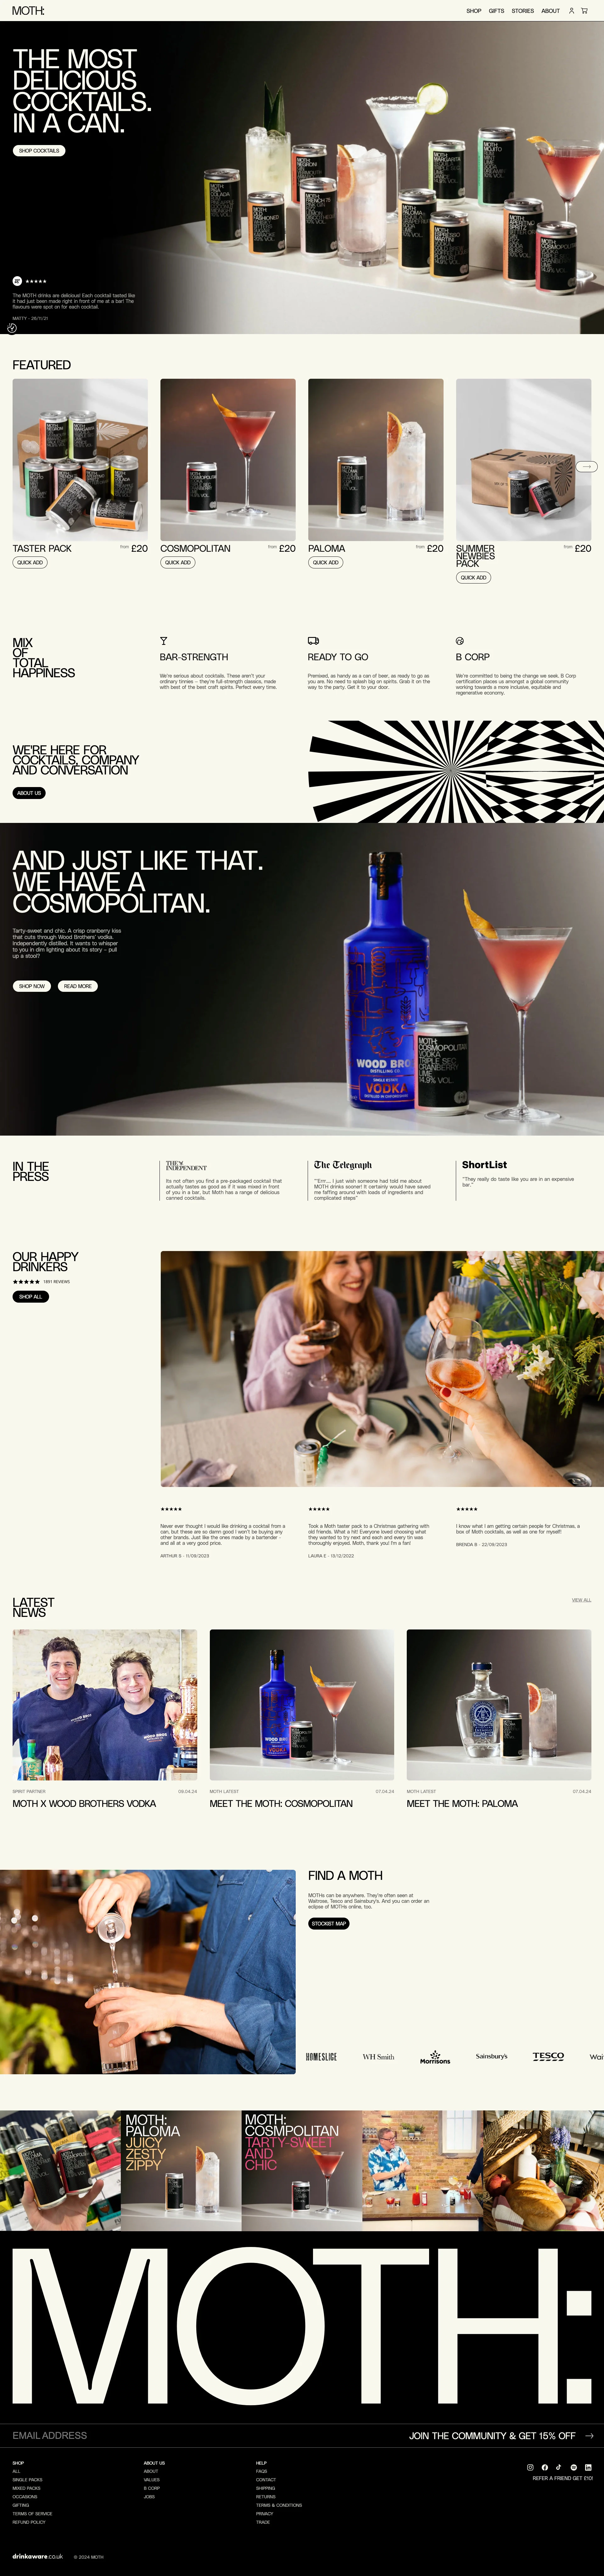 MOTH Landing Page Example: 8 seriously delicious cocktails. Premixed to perfection. Made full strength. With the best craft spirits around. Ready to drink wherever – picnics or posh dinners. Whatever you’re up to, get us delivered next day to your door. Take us with you.